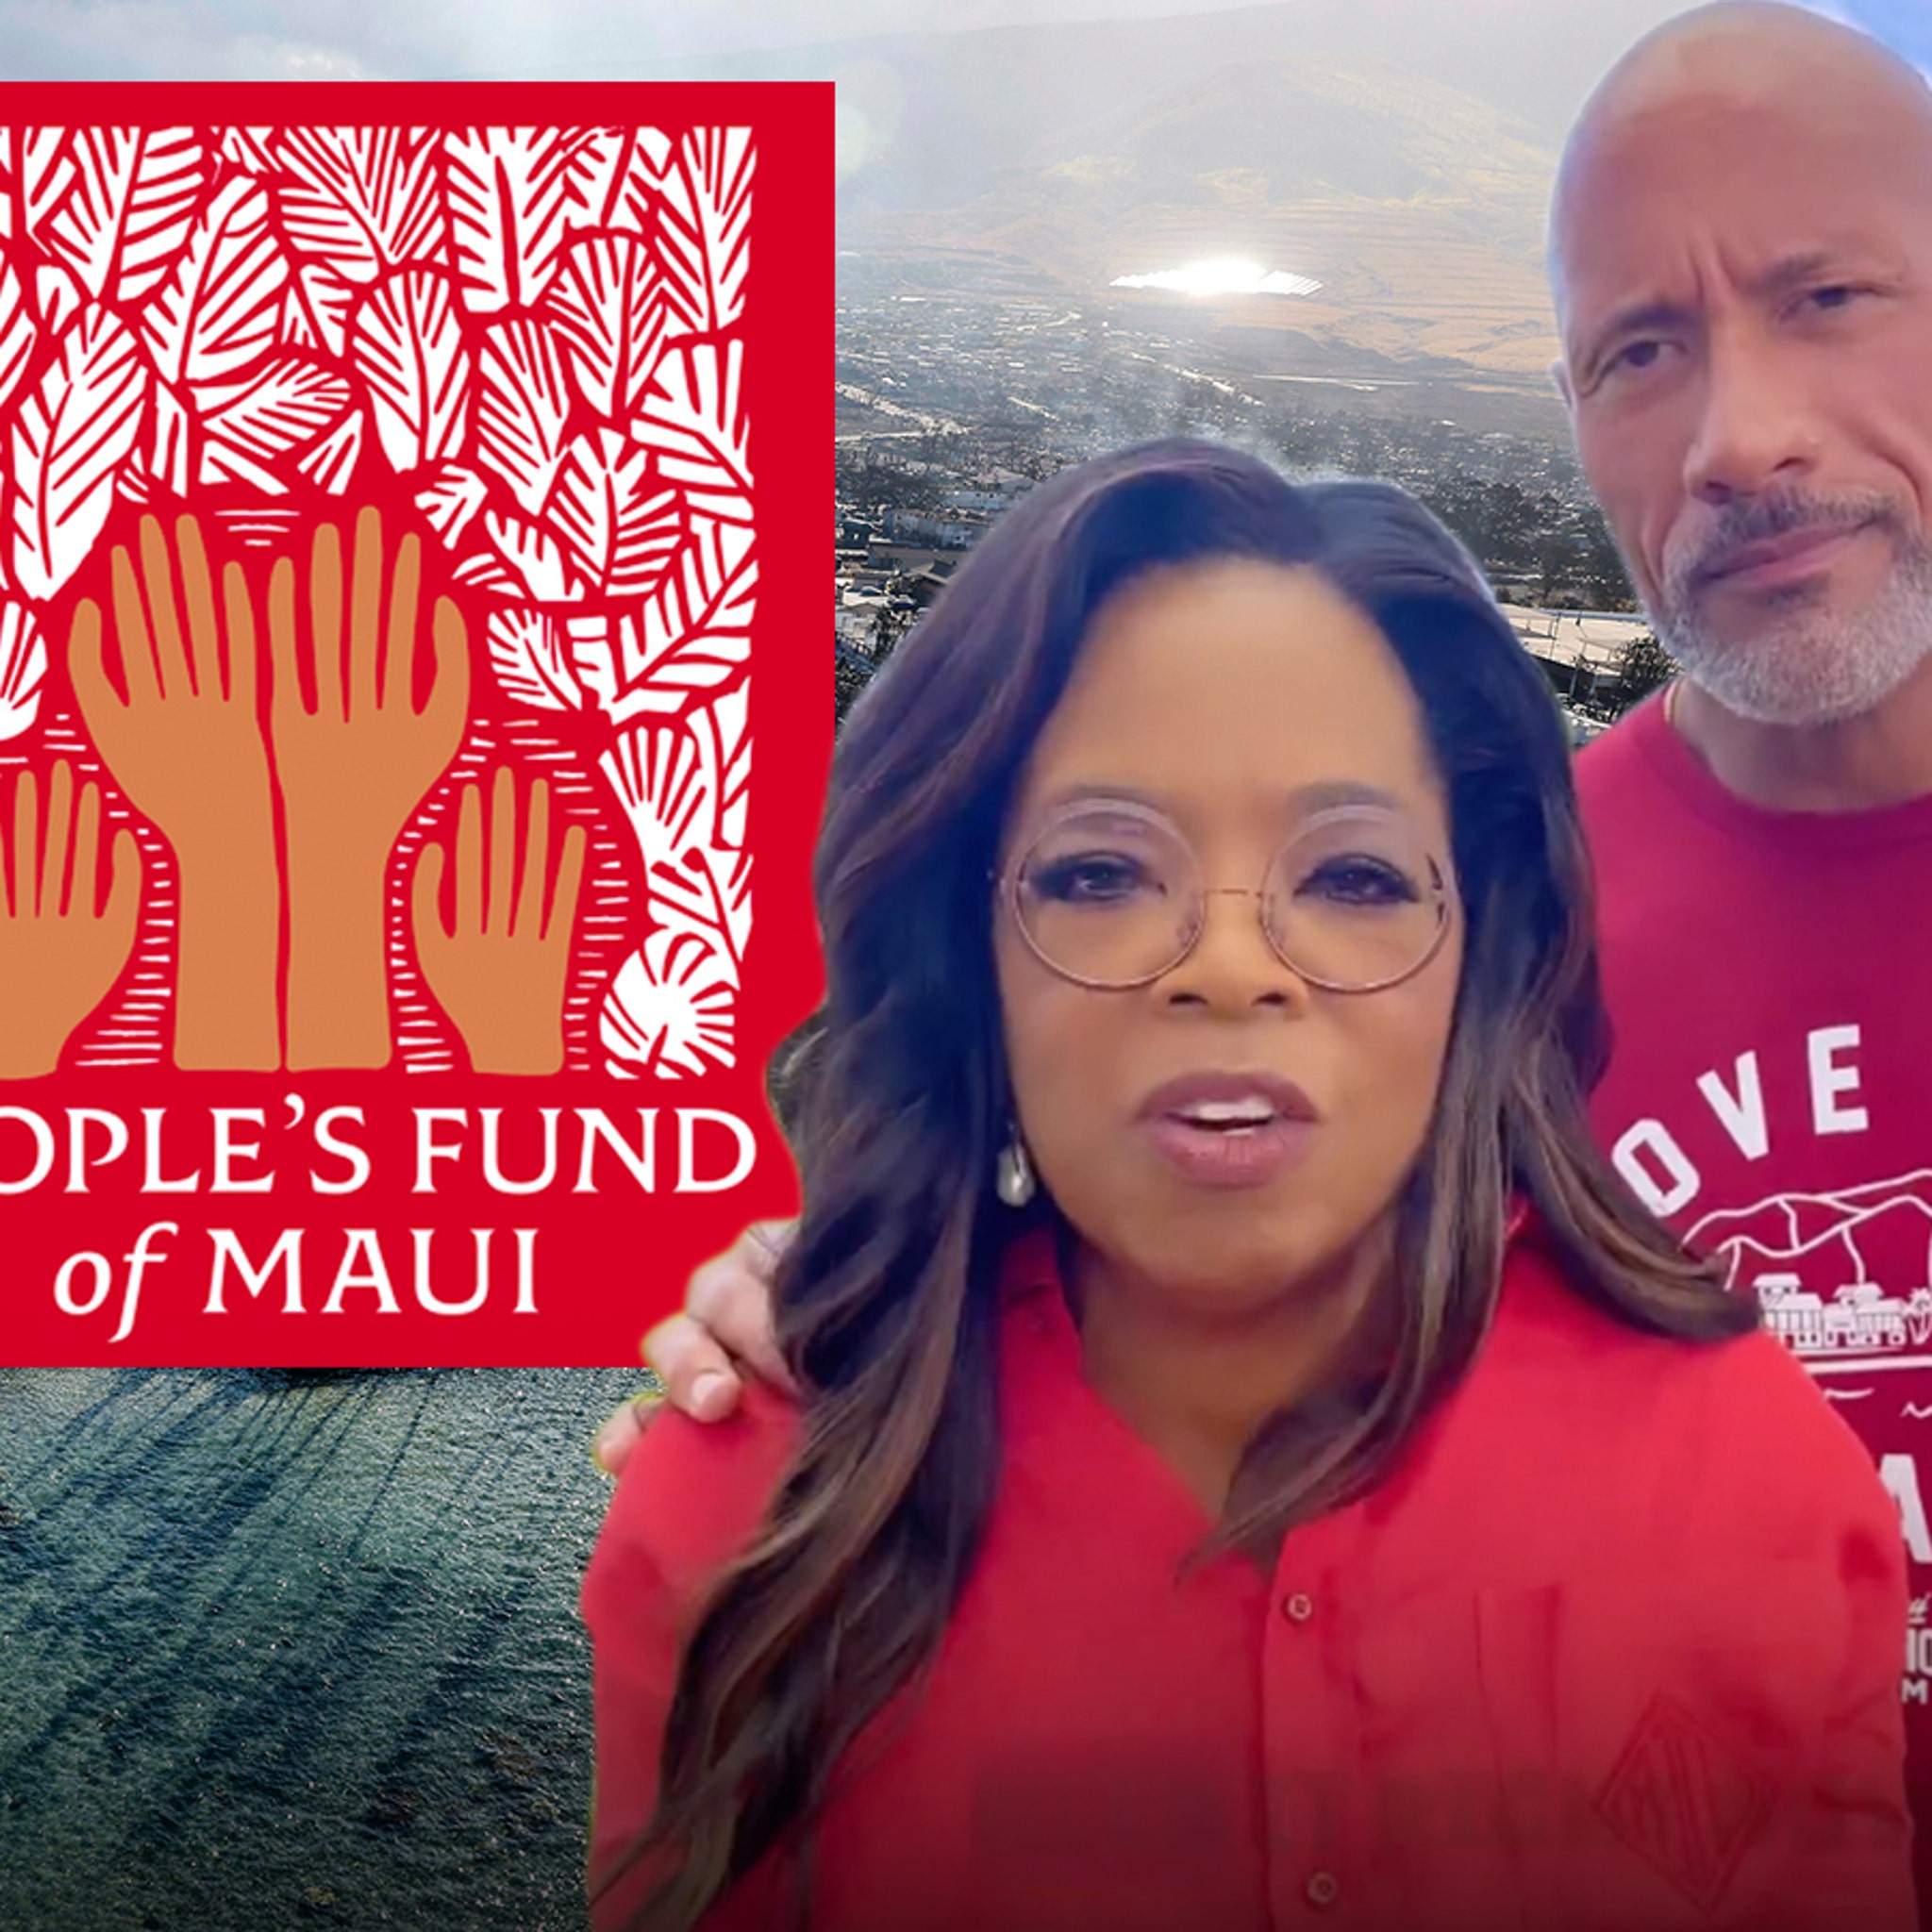 Oprah is stuck between a ROCK and a hard place after this Maui donatio